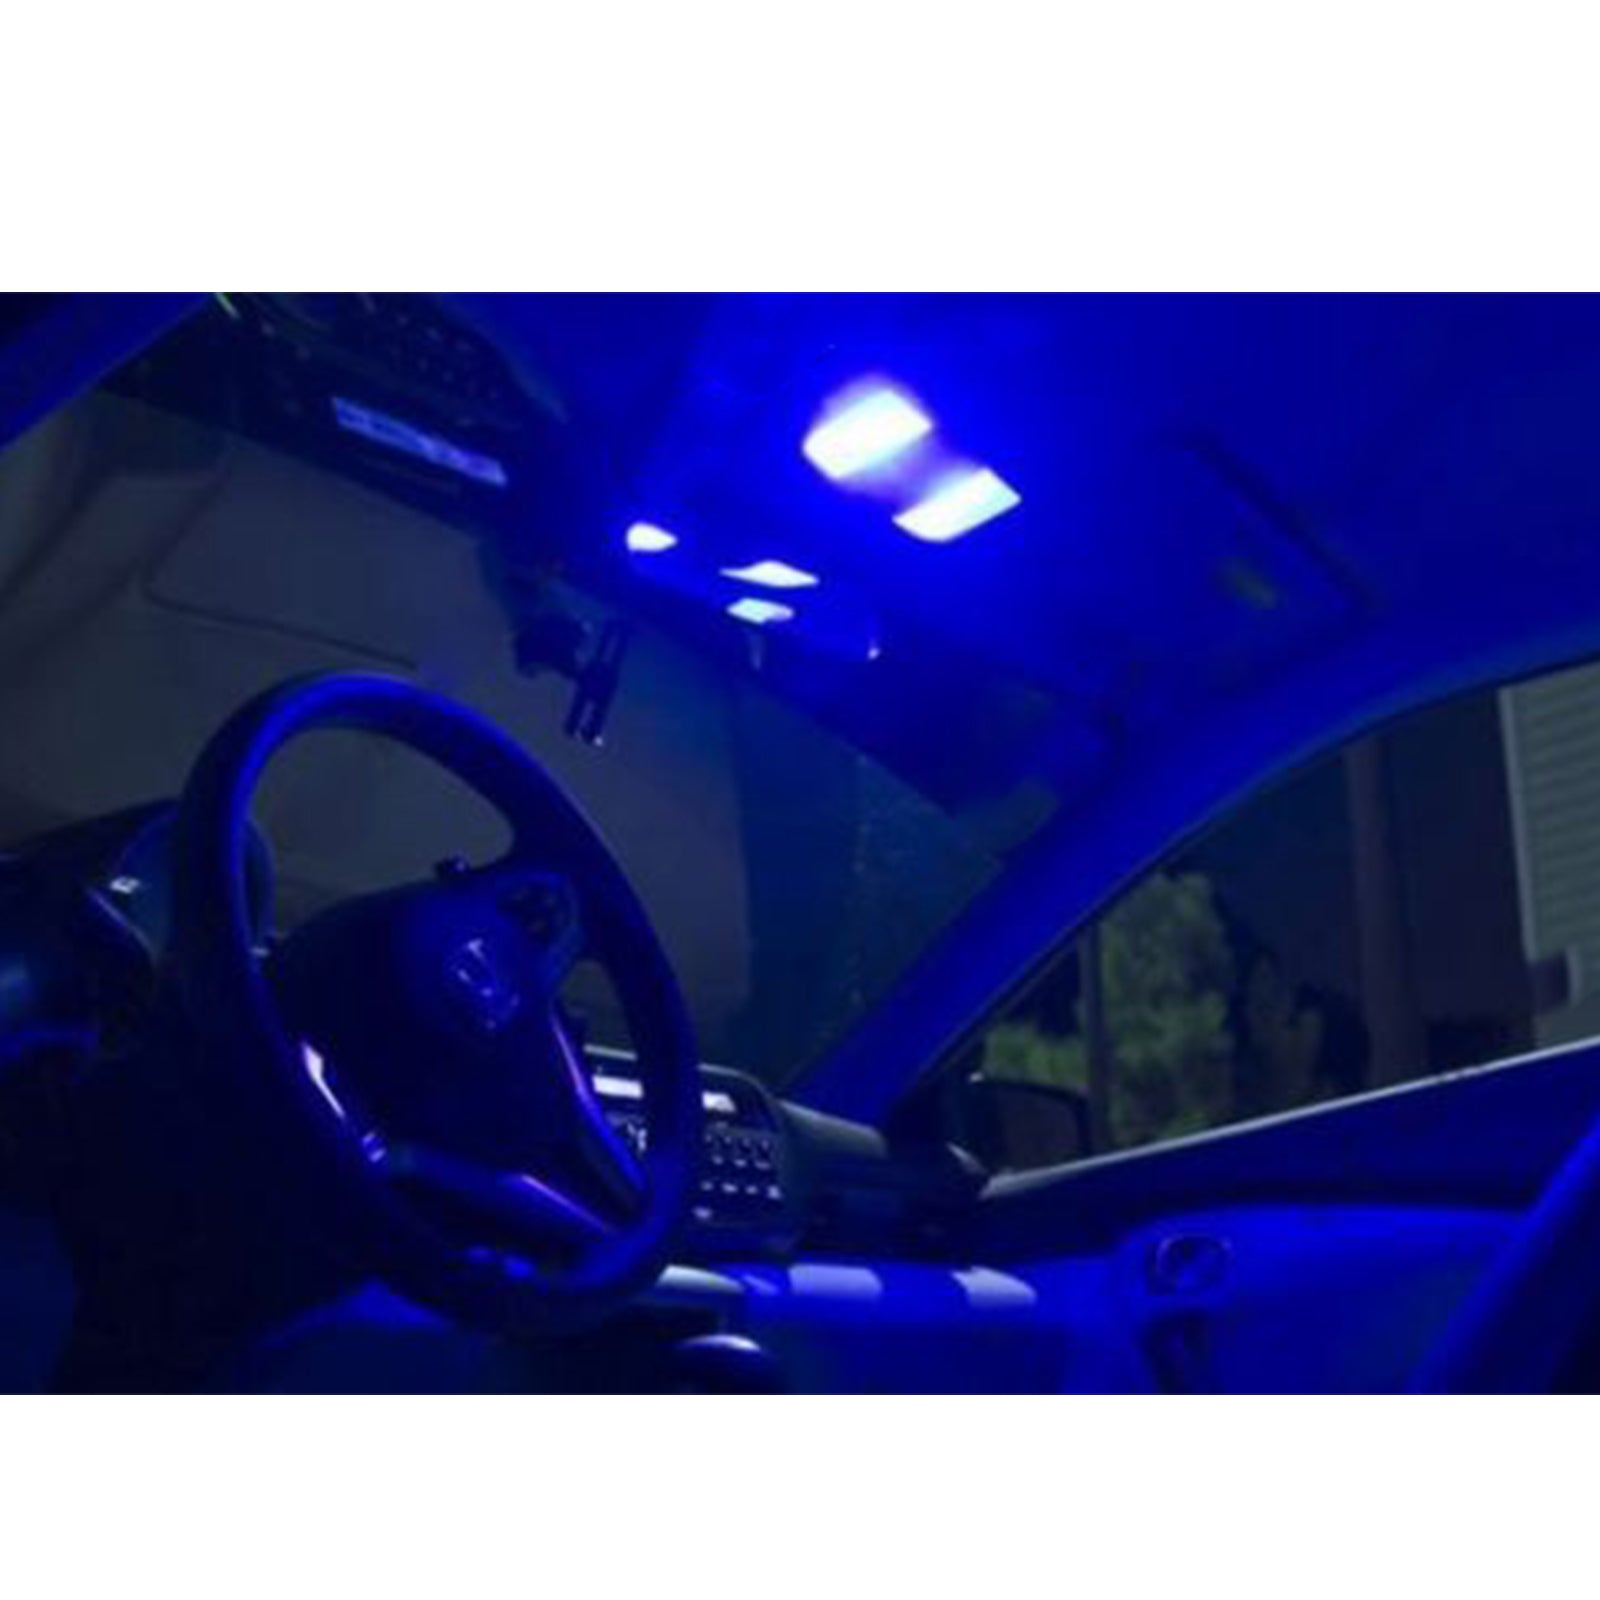 2010 Up Coupe 5 Light Led Interior Lights Package Kit For